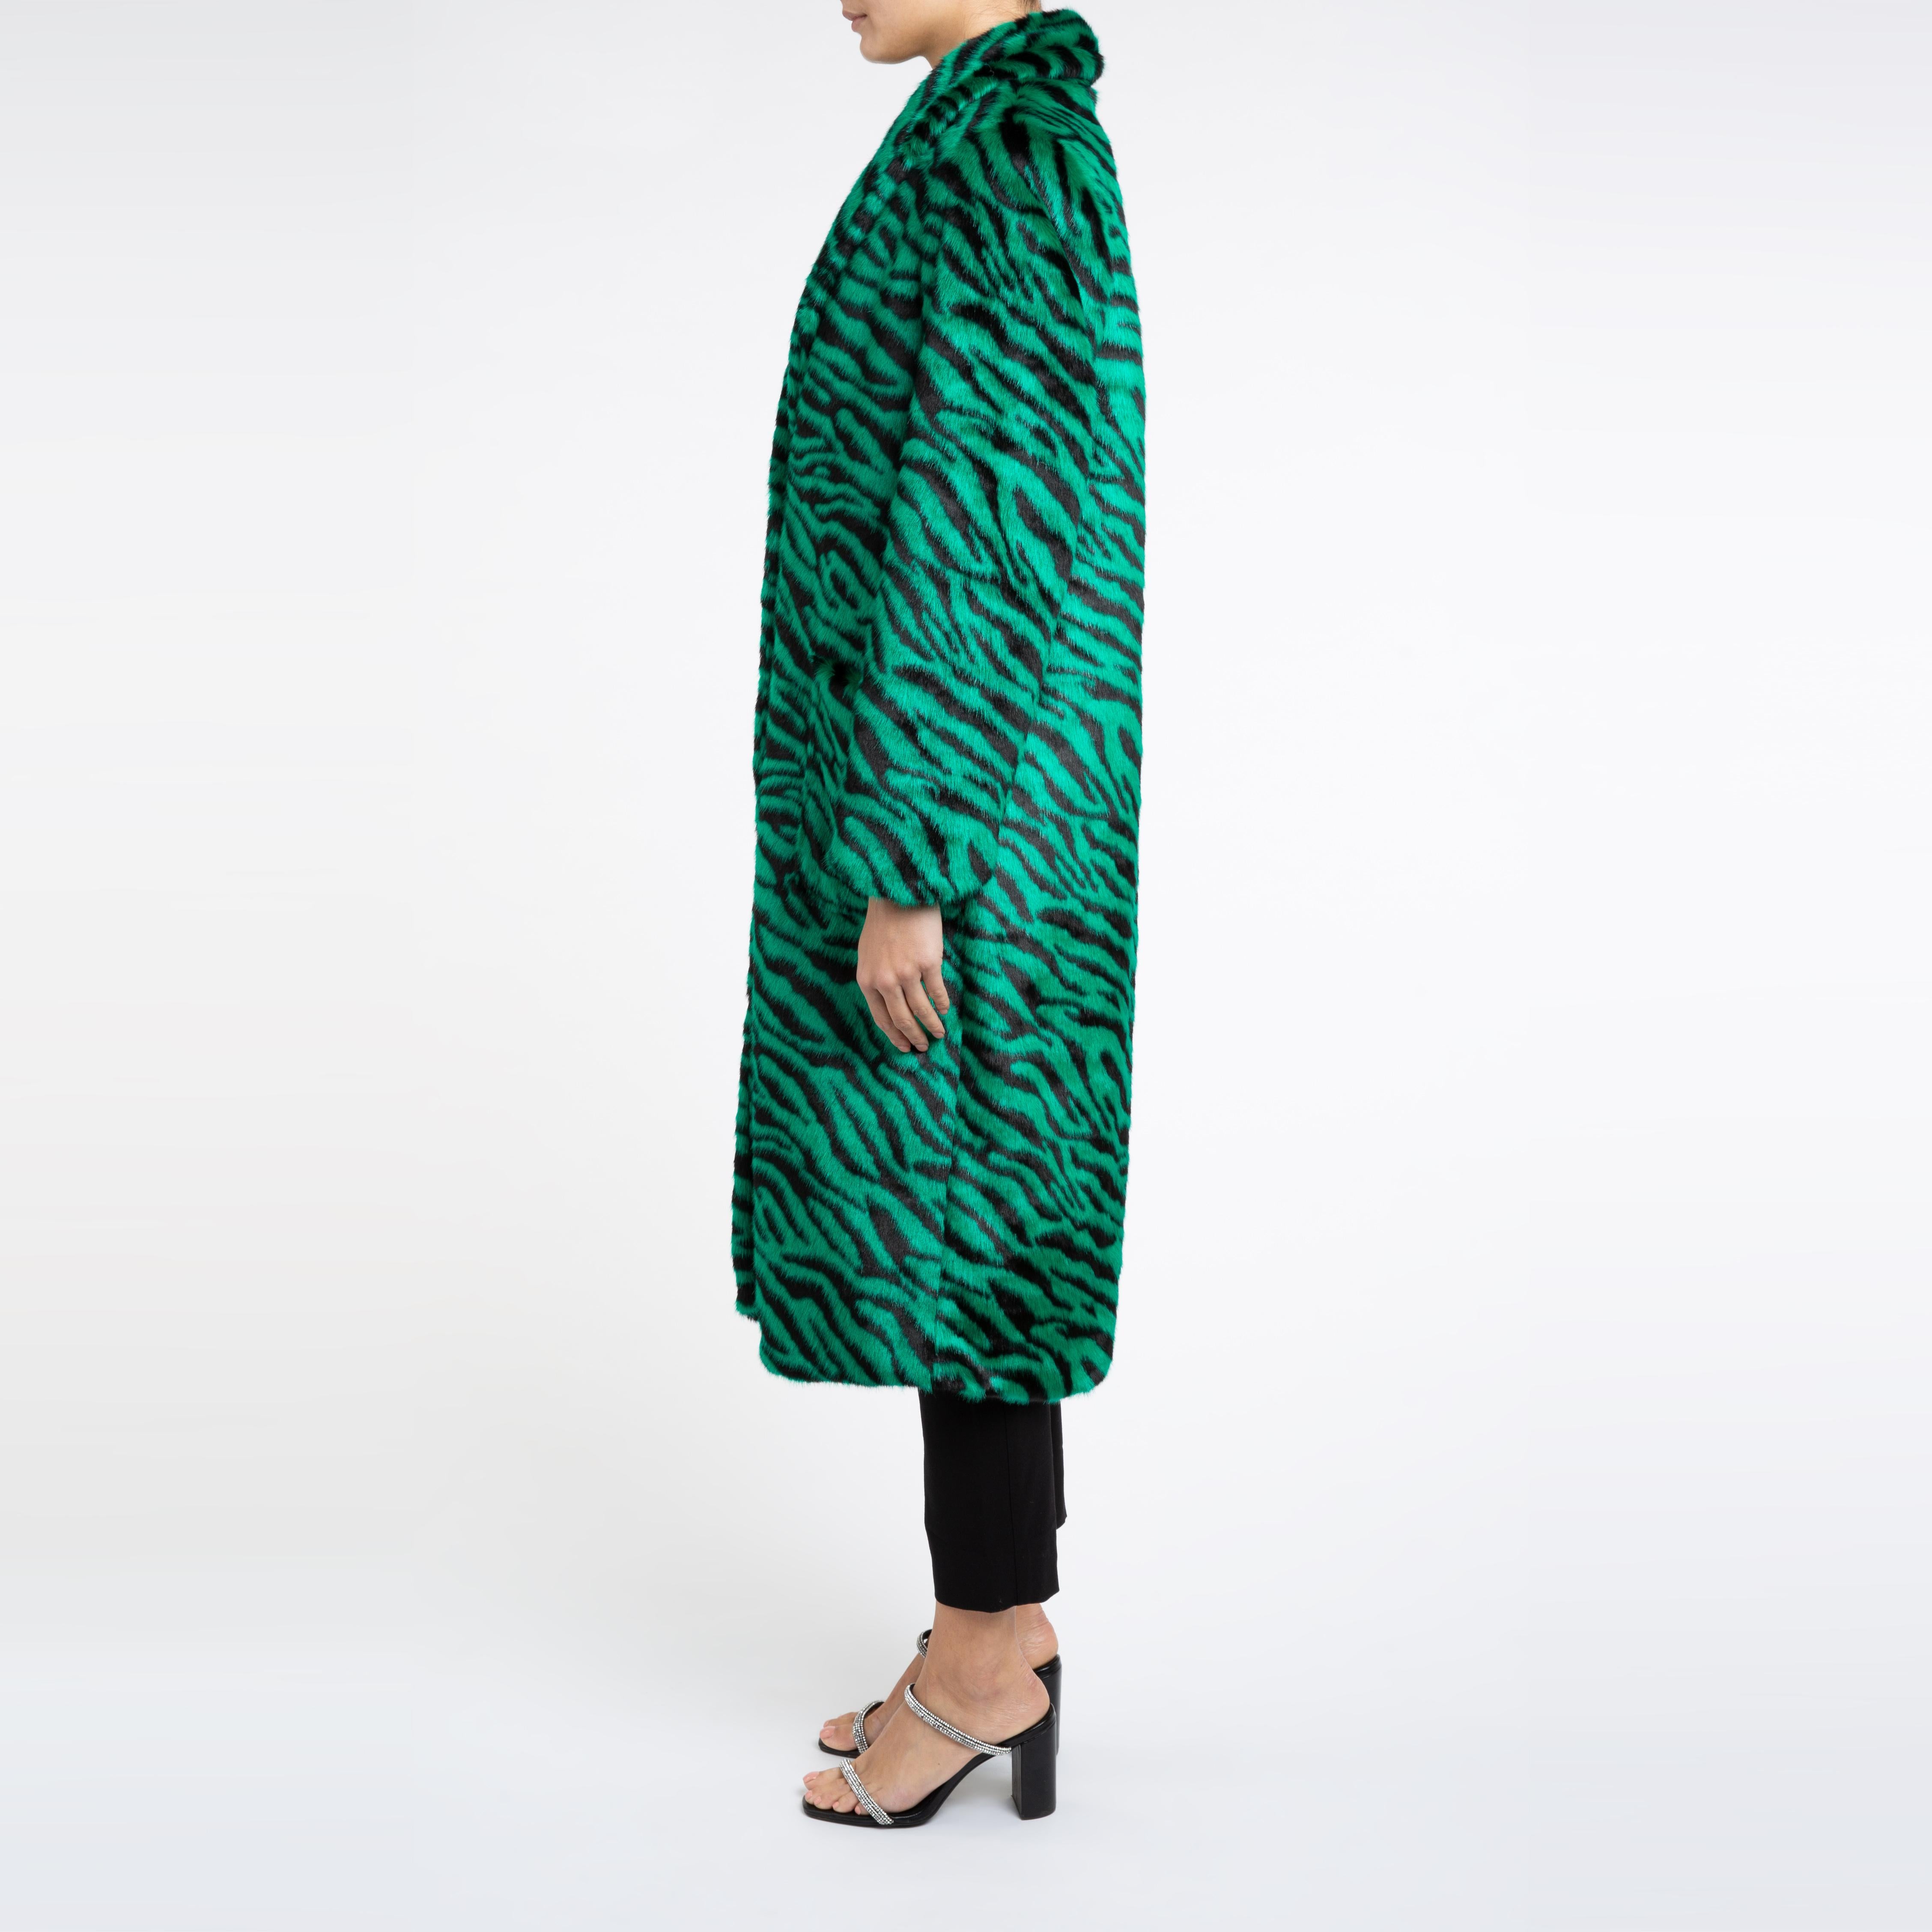 Esmeralda Faux Fur Coat in Emerald Green Zebra Print size uk 12

A coat for dressing up and down with jeans or a dress and to keep you cosy for the cold weather. 
This longline design is flattering and easy to wear with jumpers etc with its relaxed